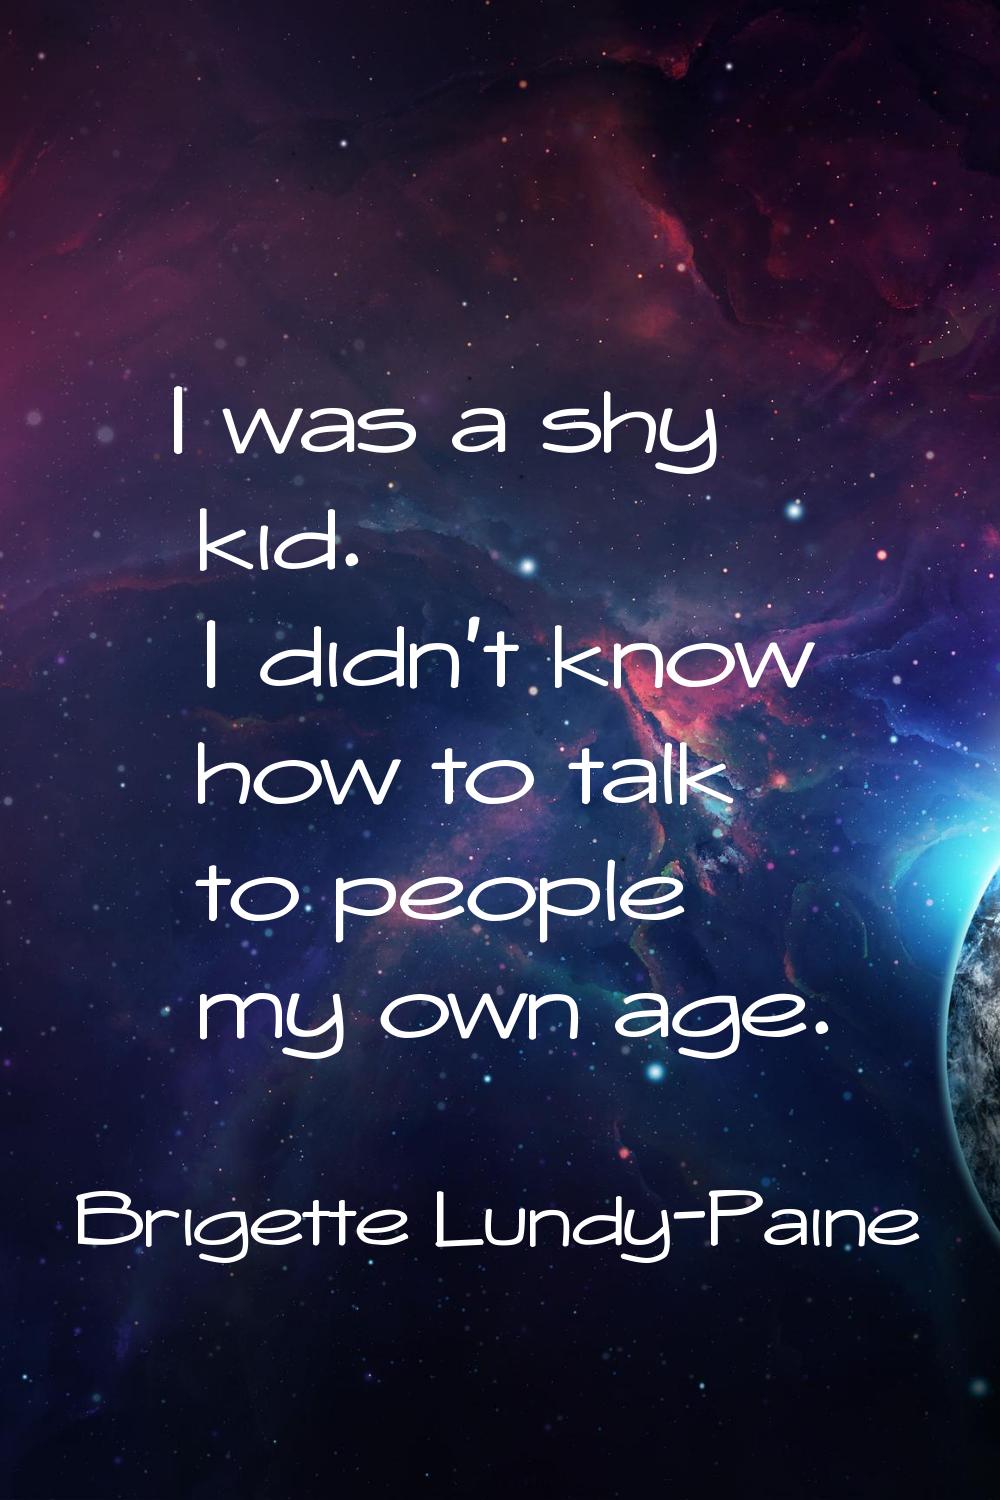 I was a shy kid. I didn't know how to talk to people my own age.